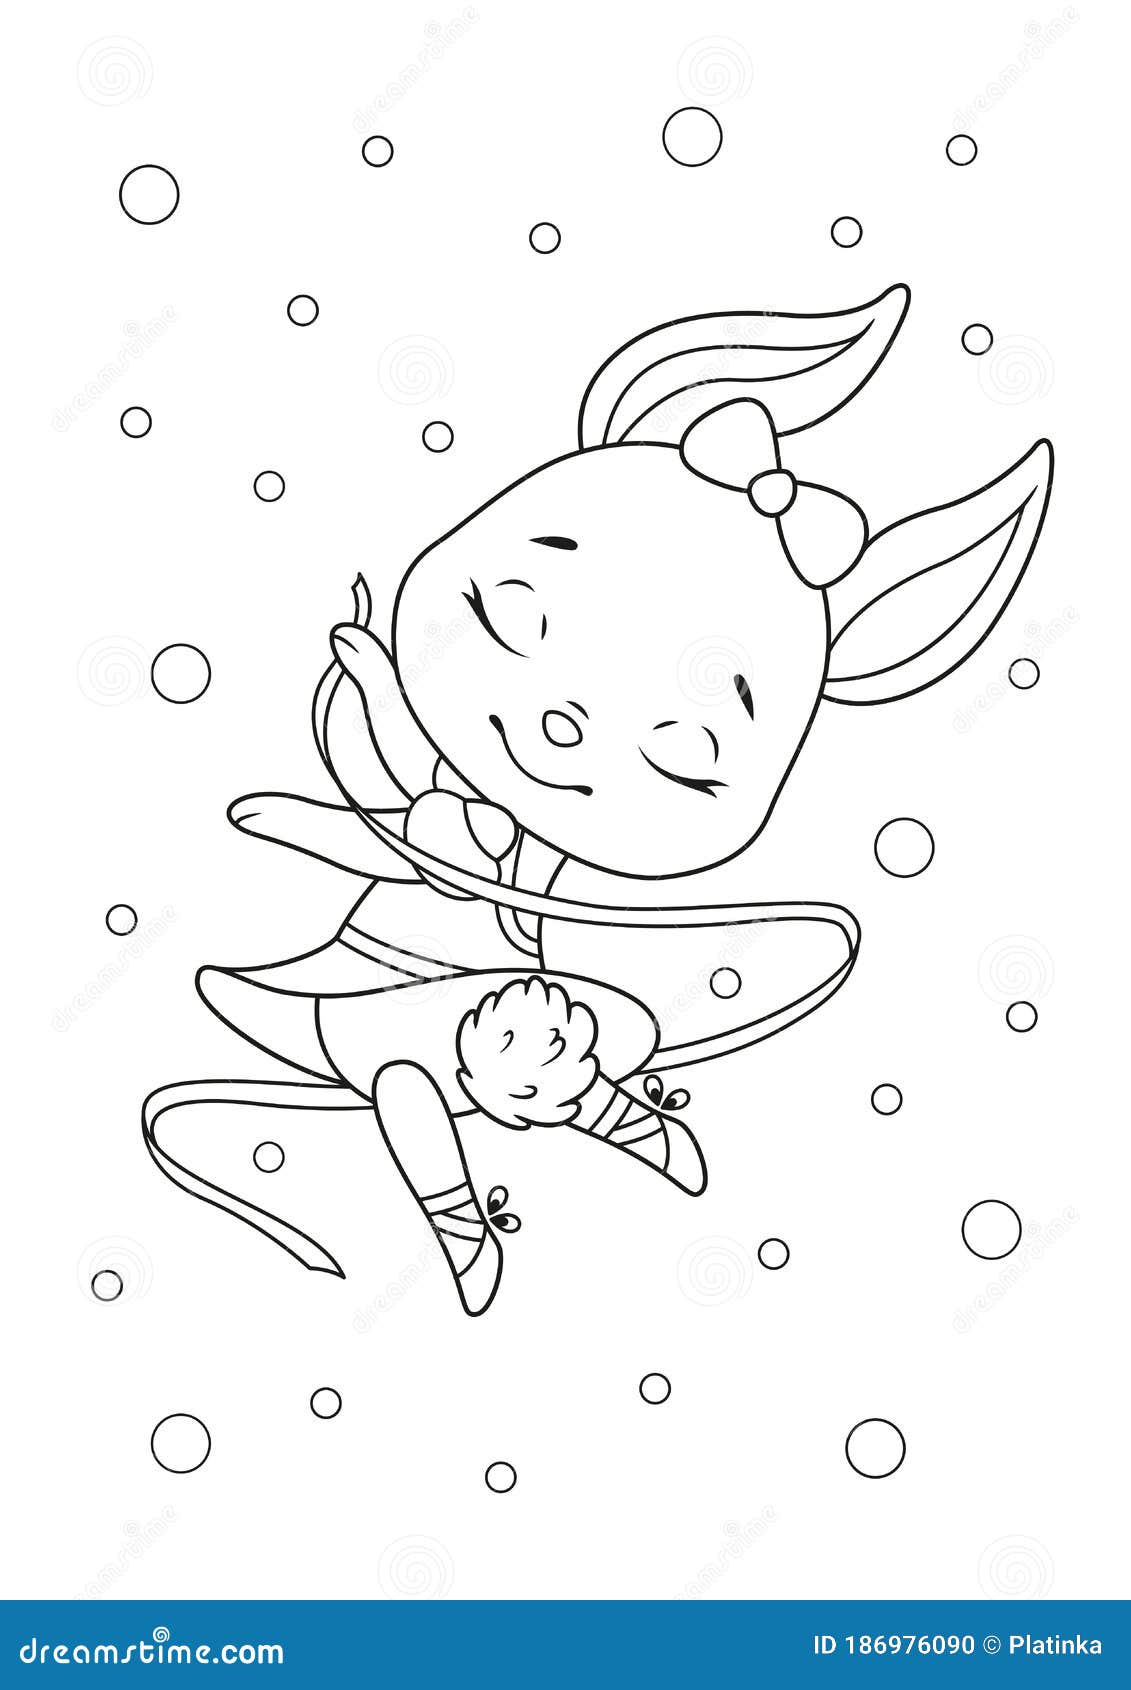 Bunny Ballerina Coloring Page Stock Vector - Illustration of girl